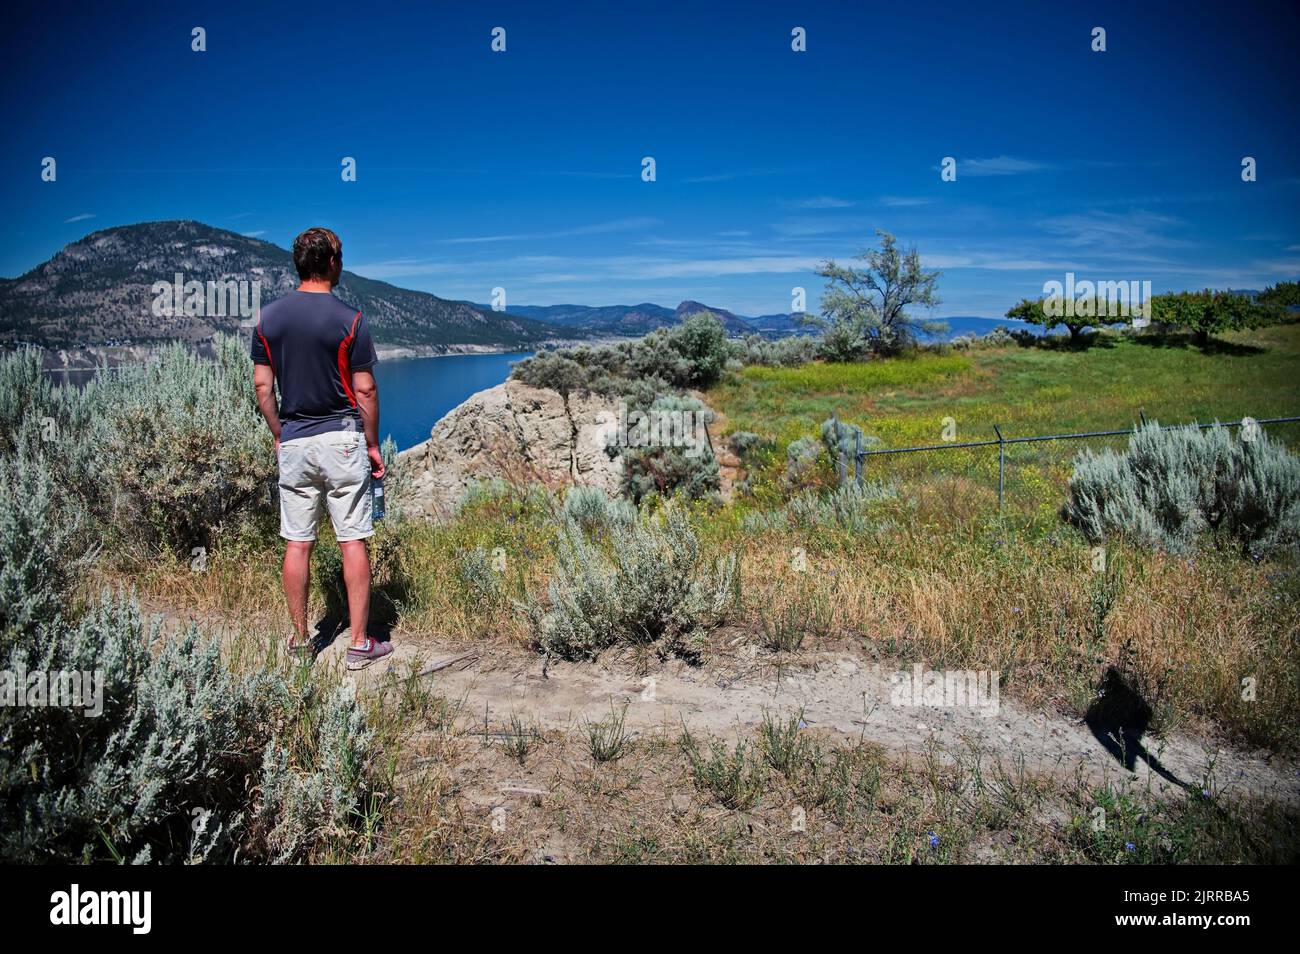 Rear view of the mature man walking in nature Stock Photo